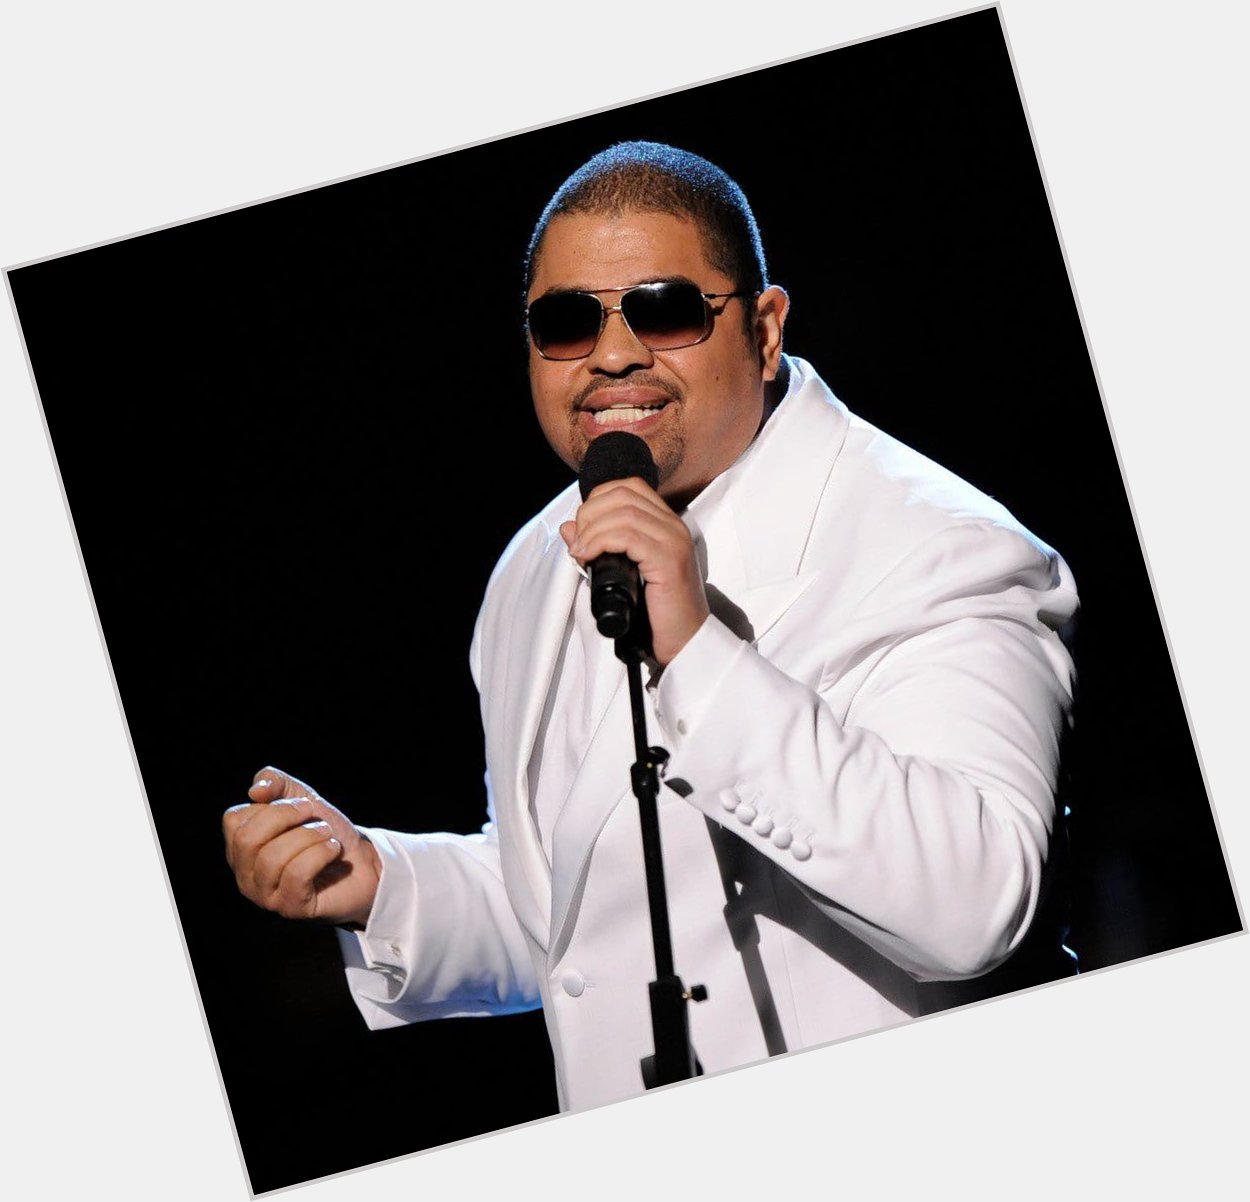 Happy Birthday to Heavy D, who would have been 53 today. May his music and legacy live on forever. 